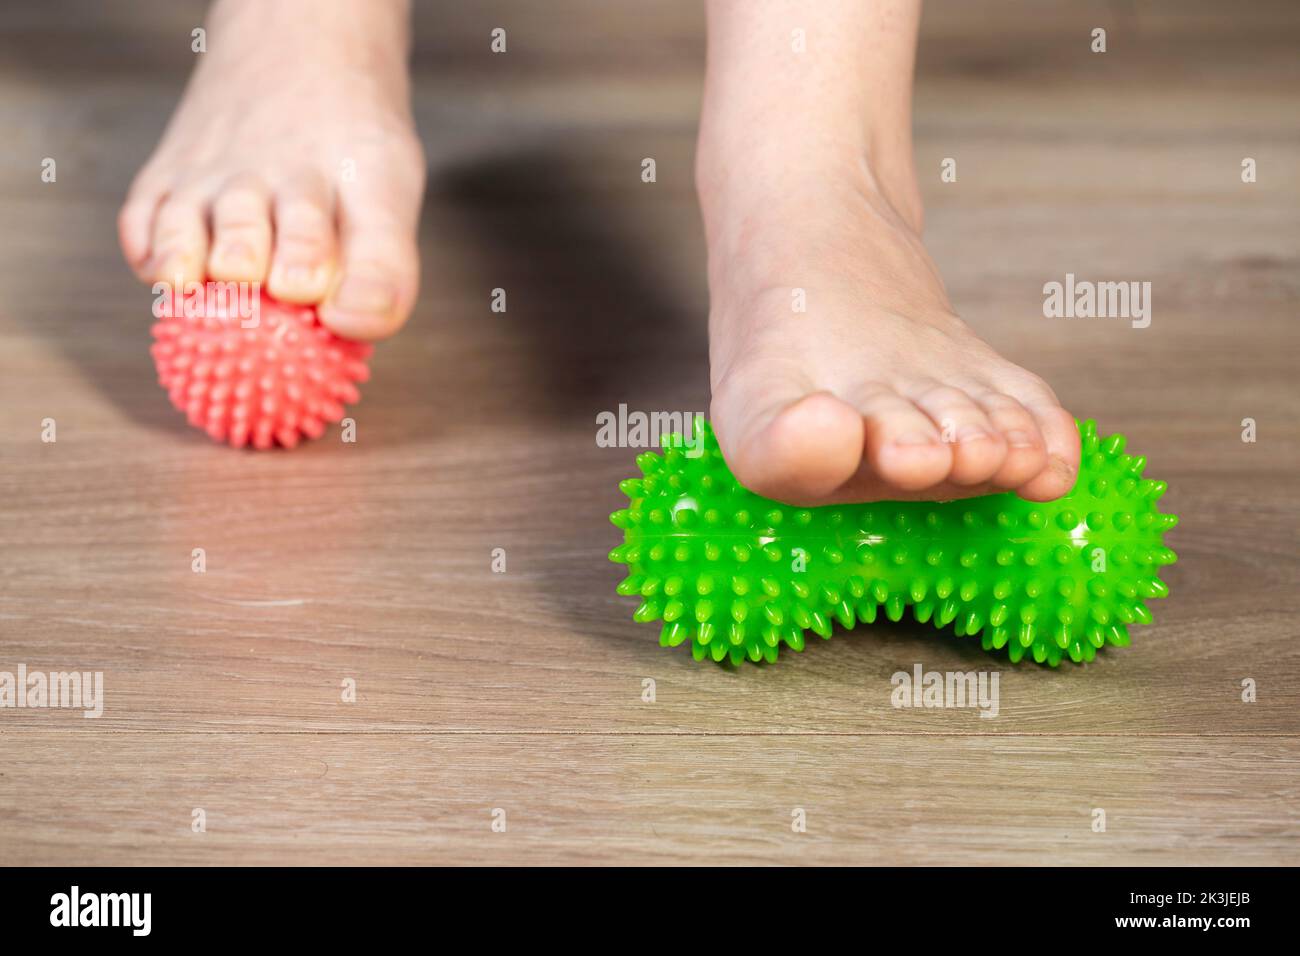 Foot massage machine hi-res stock photography and images - Alamy